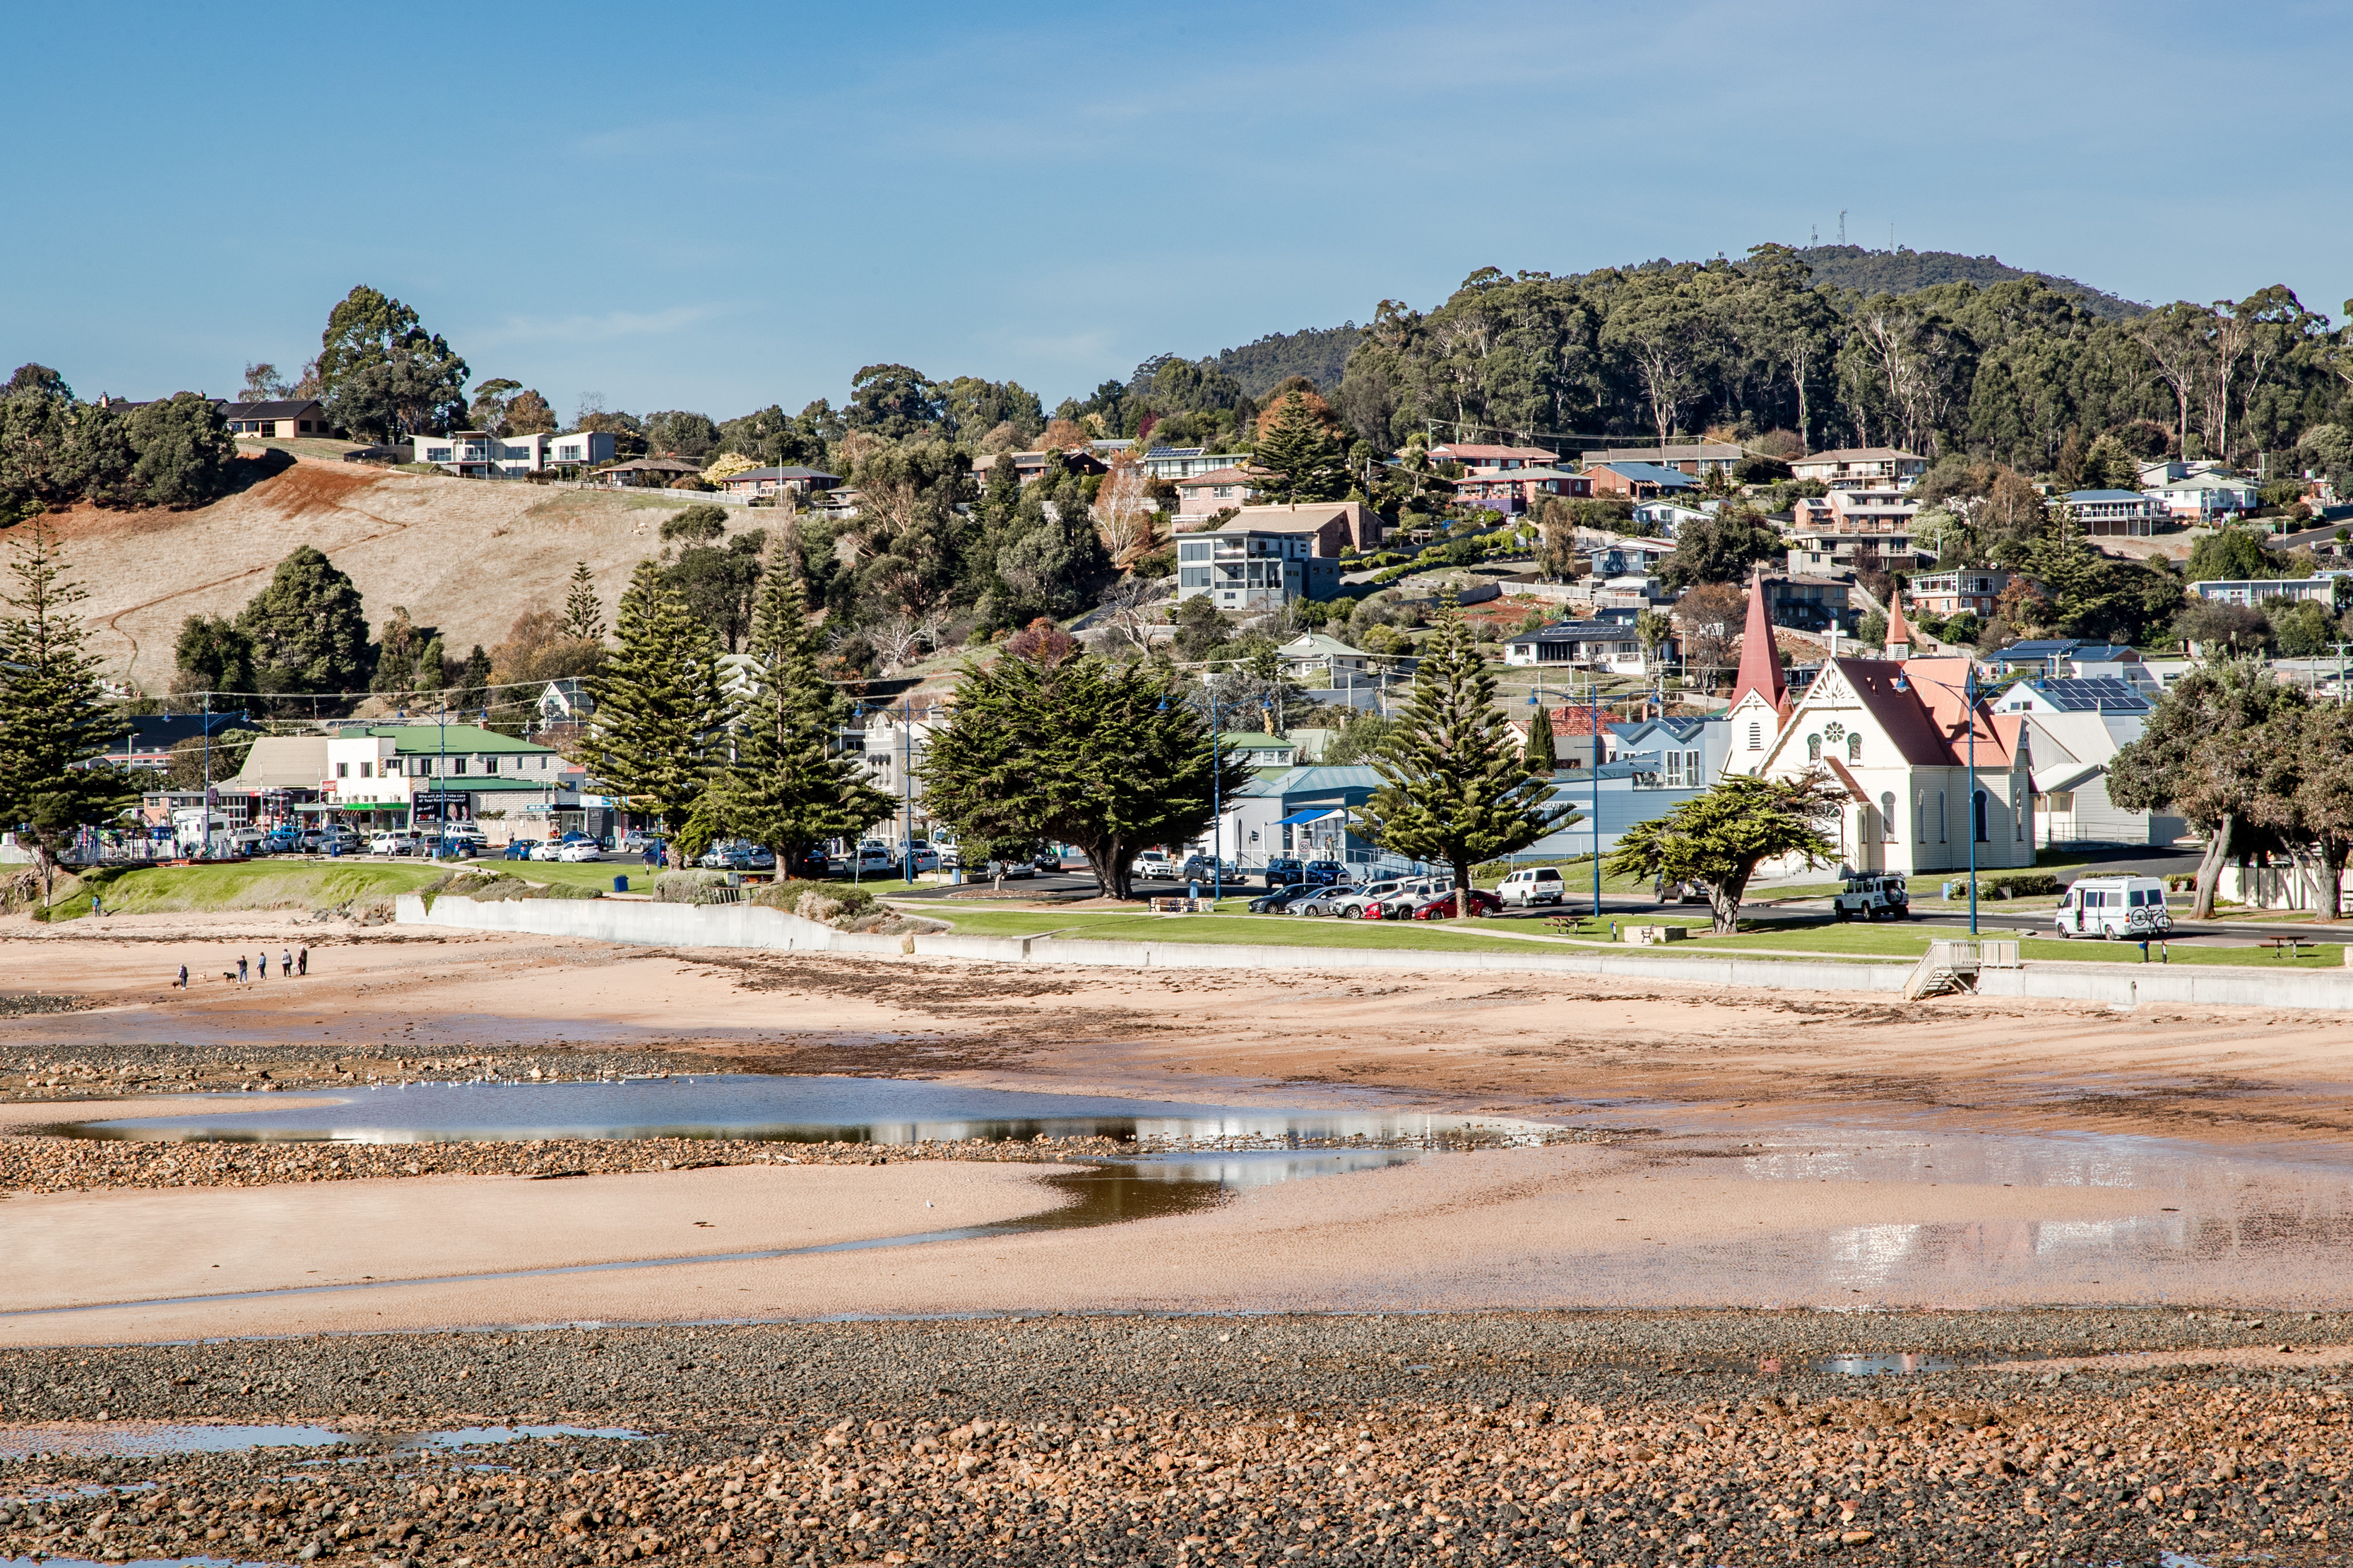 A bright, clear image captured of the Penguin Foreshore. Sand fills the foreground with buildings and bushland fill the background.